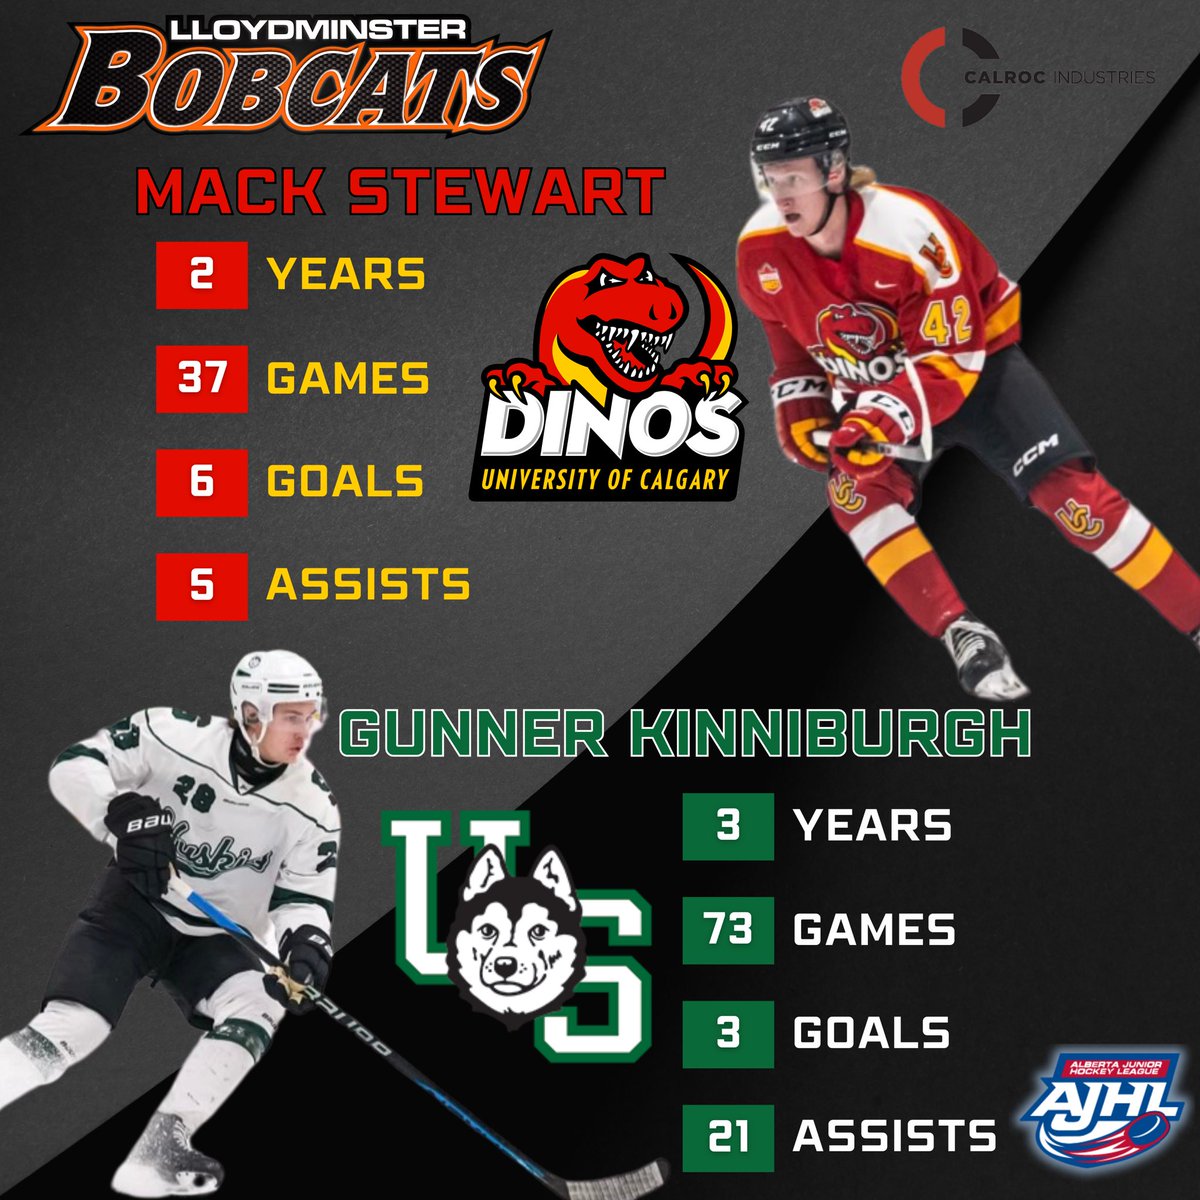 Alumni update presented by CALROC Industries! . This week’s feature is former Bobcats Captain Gunner Kinniburgh and three year Bobcat Mack Stewart! . #BorderCityBuilt